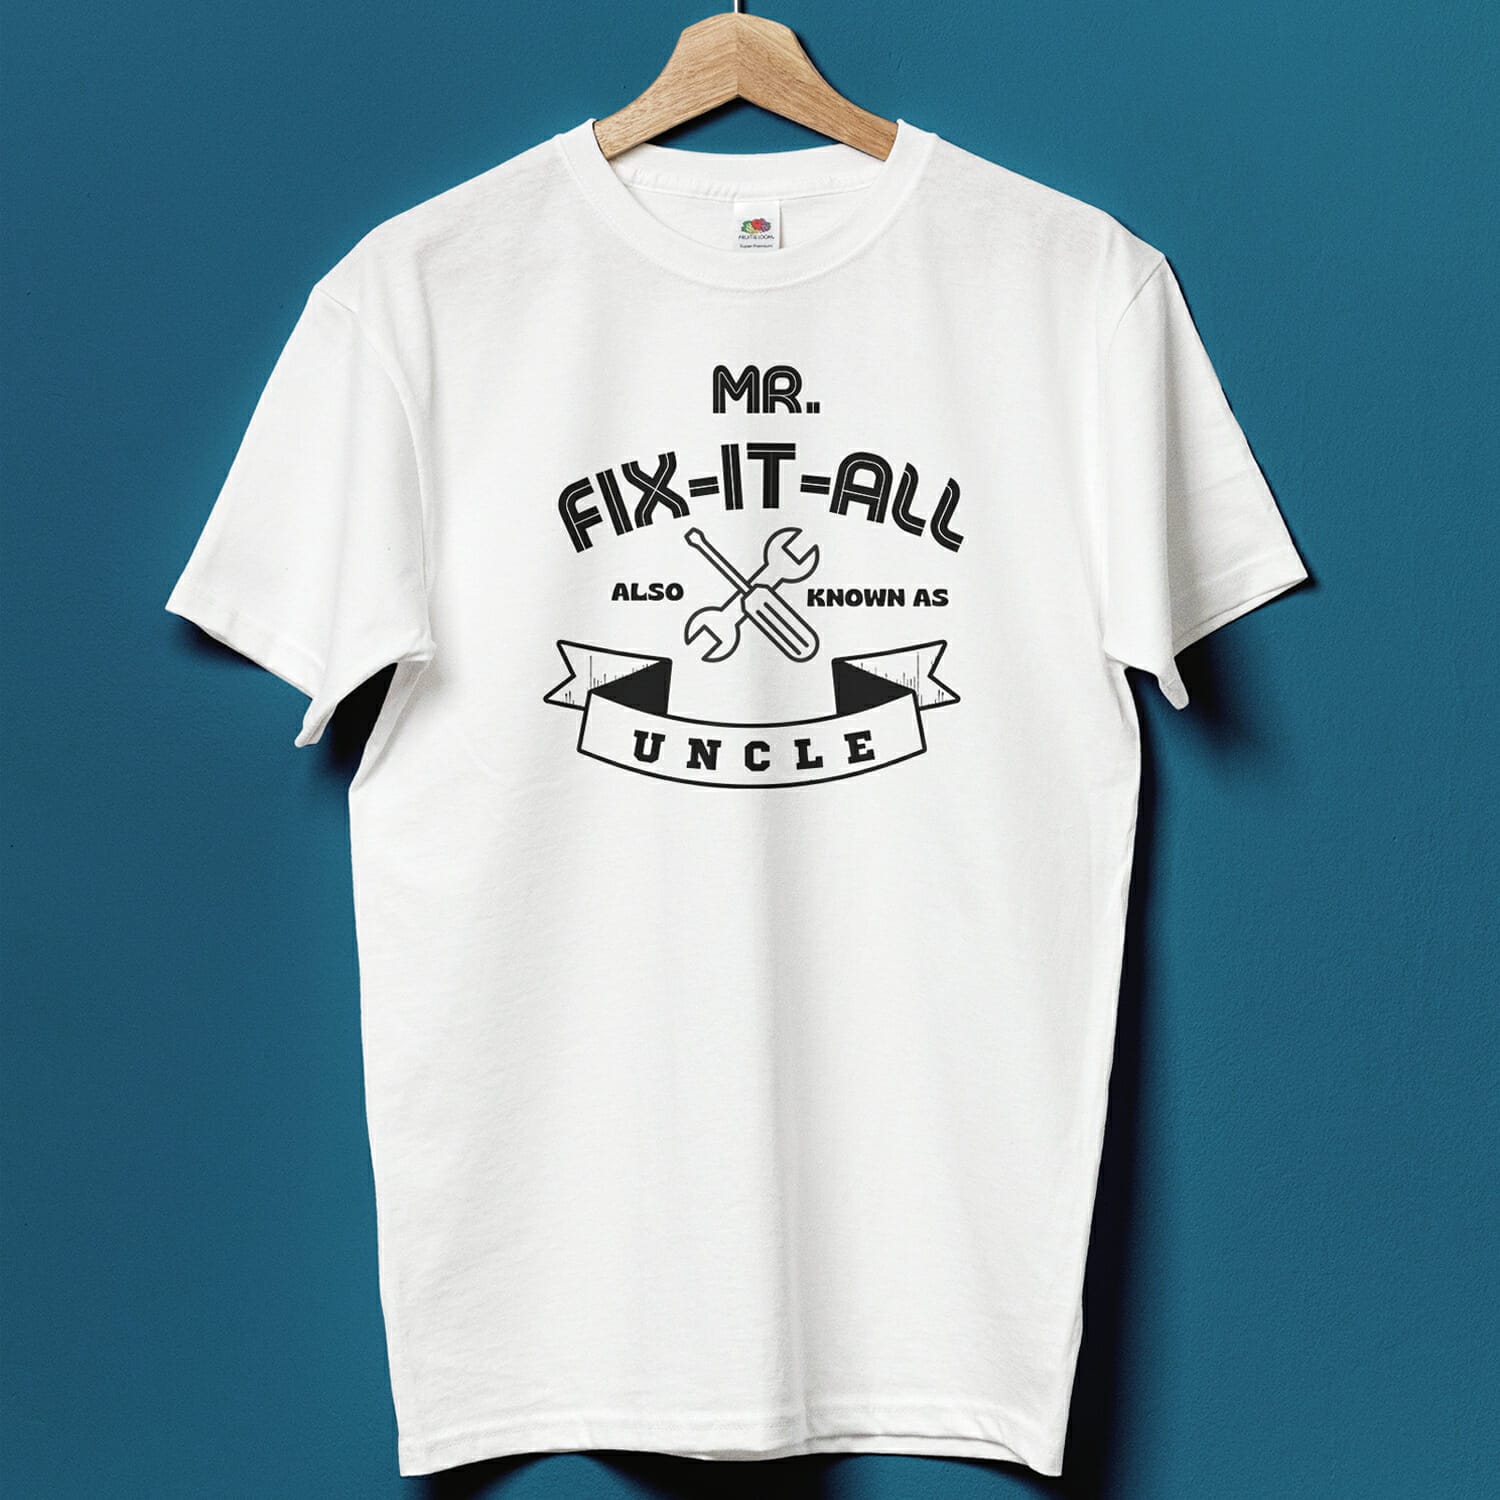 Mr fix it all feature img